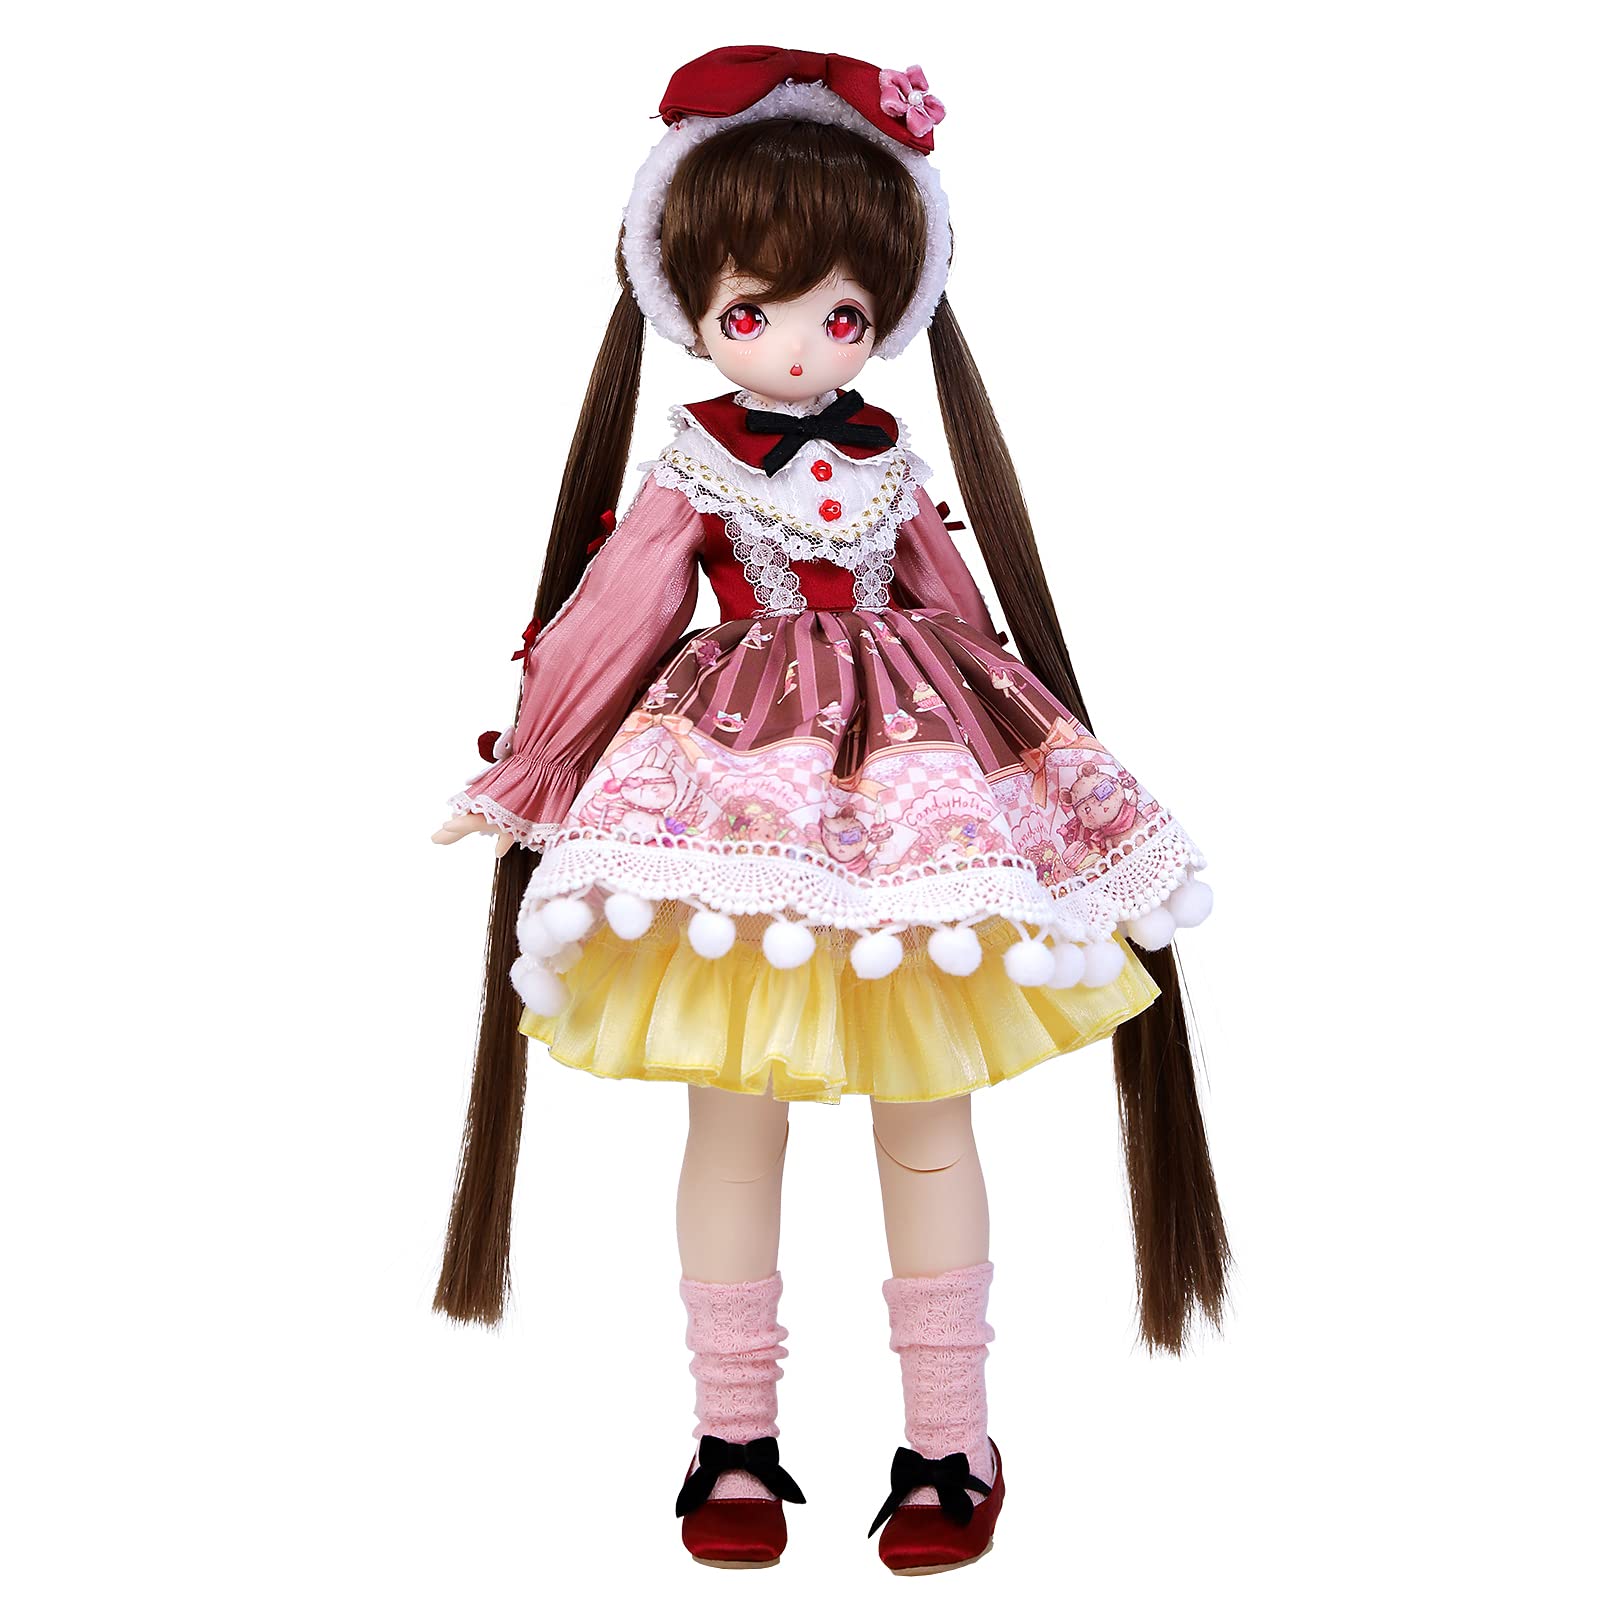 Aongneer BJD Dolls 1/6 Anime Doll 12 Inch Ball Jointed Doll 3D Glass Eyes  with Brown Wig, Special Clothes and Accessories, Fashion Dolls for Girls  Granddaughter Angel Bao : Amazon.in: Toys & Games